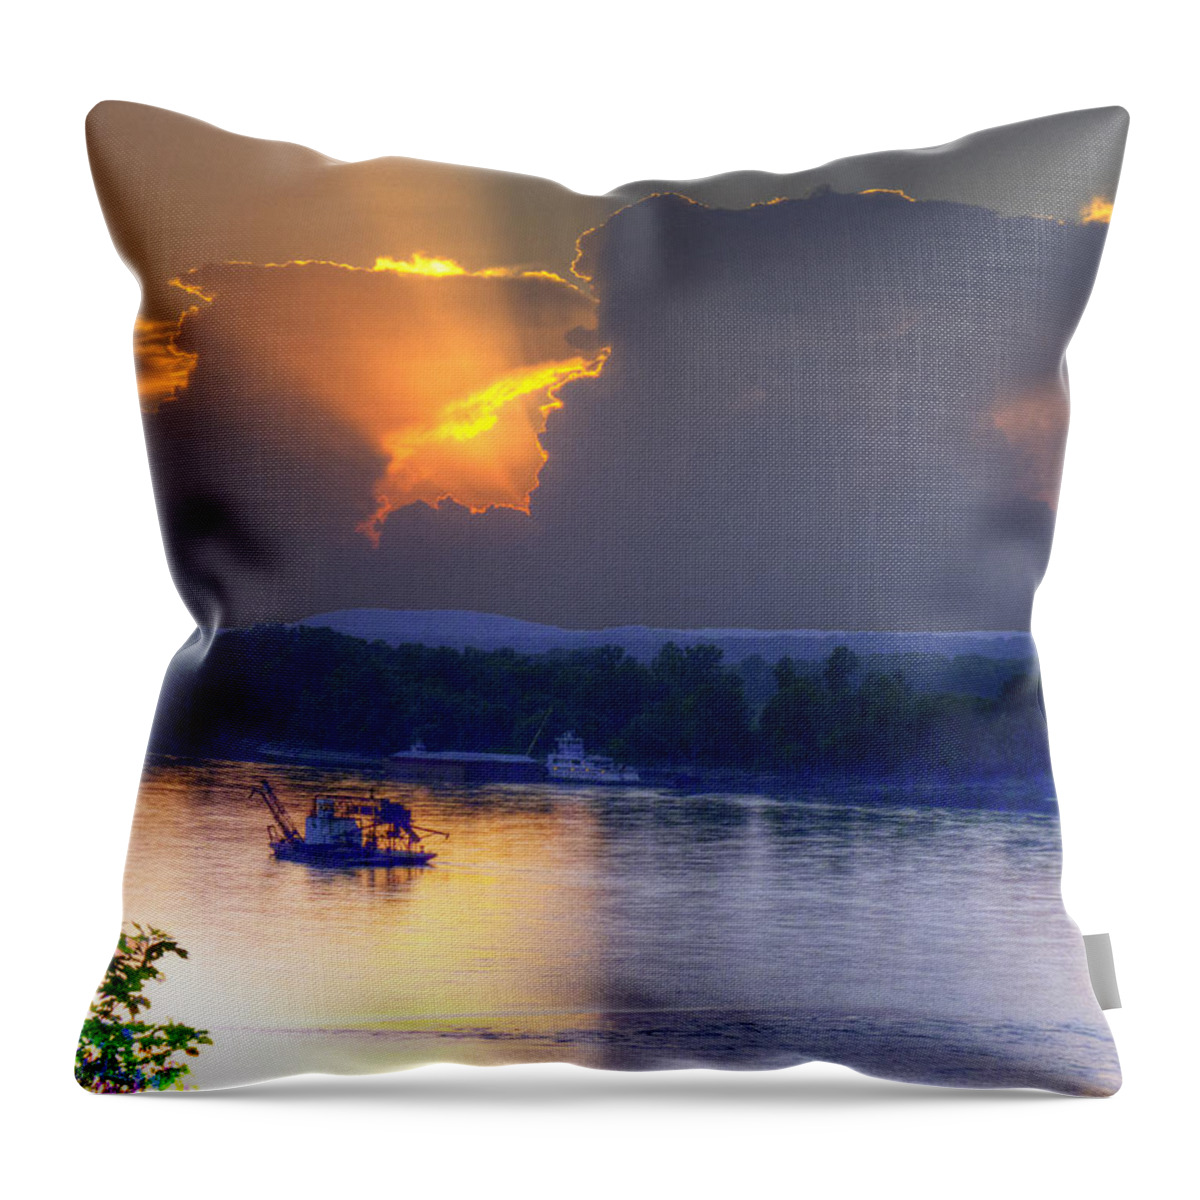 The Furnace Throw Pillow featuring the photograph The Furnace by William Fields